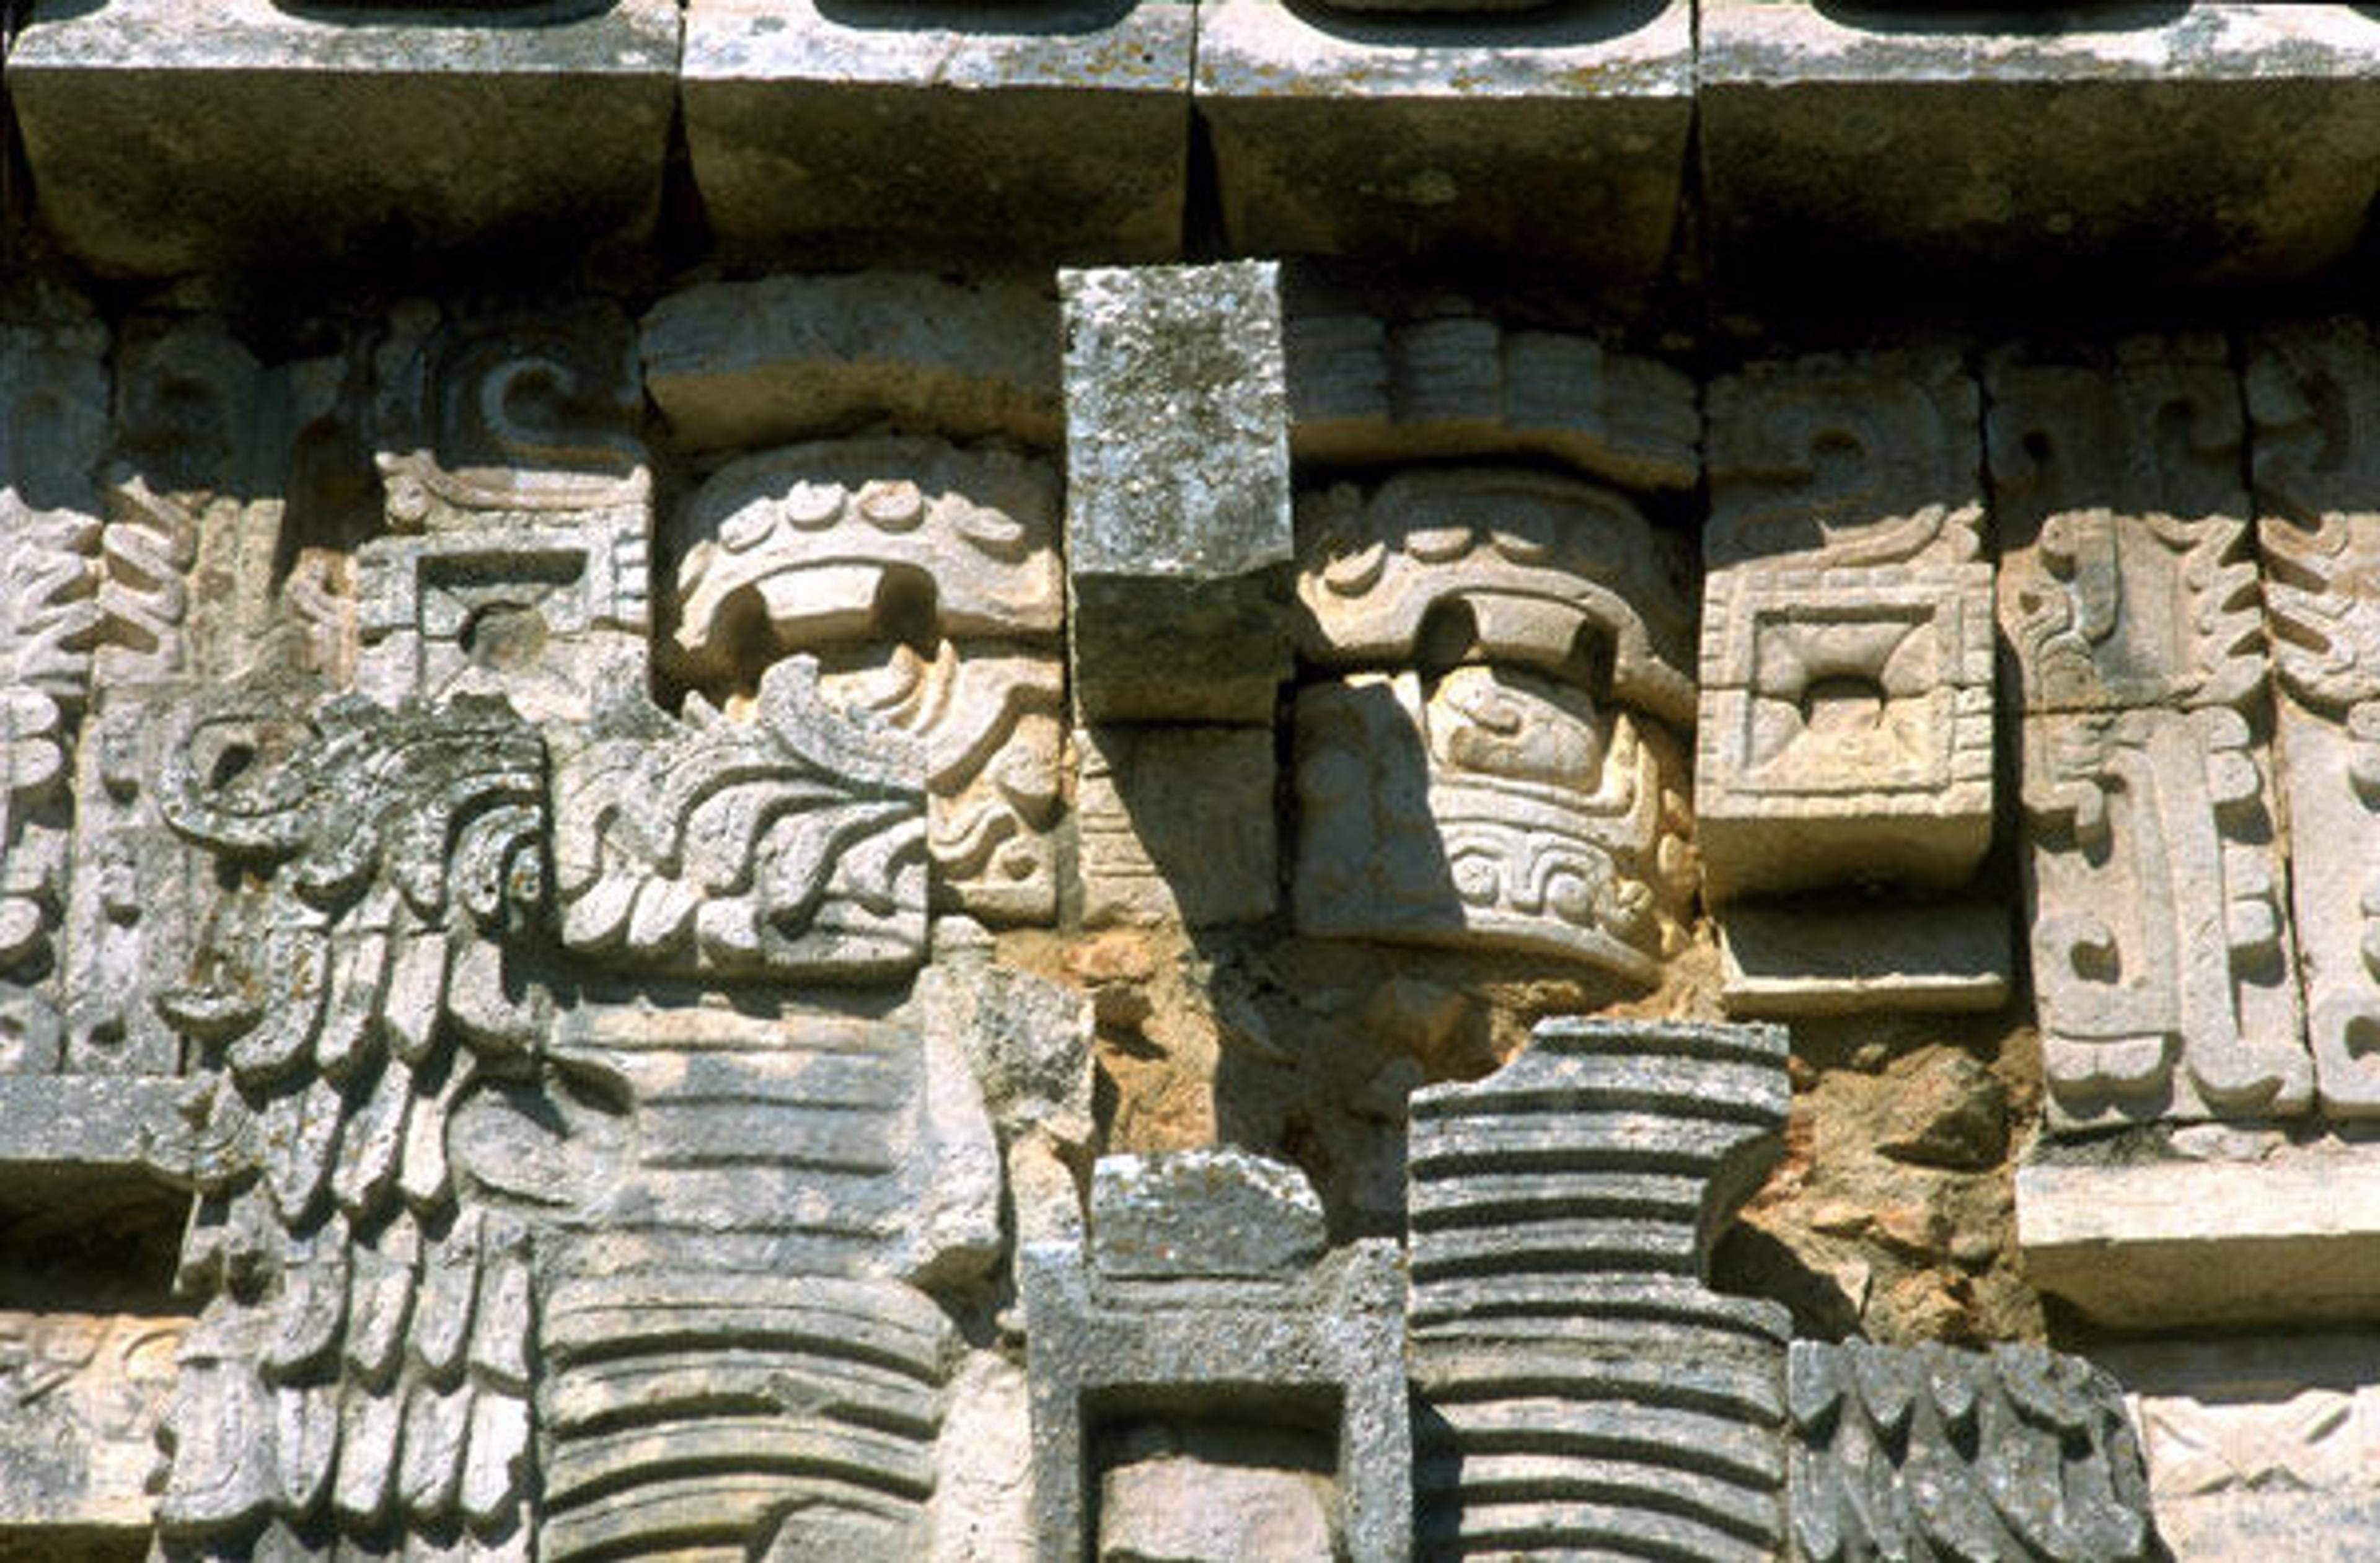 Façade, House of the Governors, Uxmal. Charles S. Rhyne, Architecture, Restoration, and Imaging of the Maya Cities of Uxmal, Kabah, Sayil, and Labná (2008)